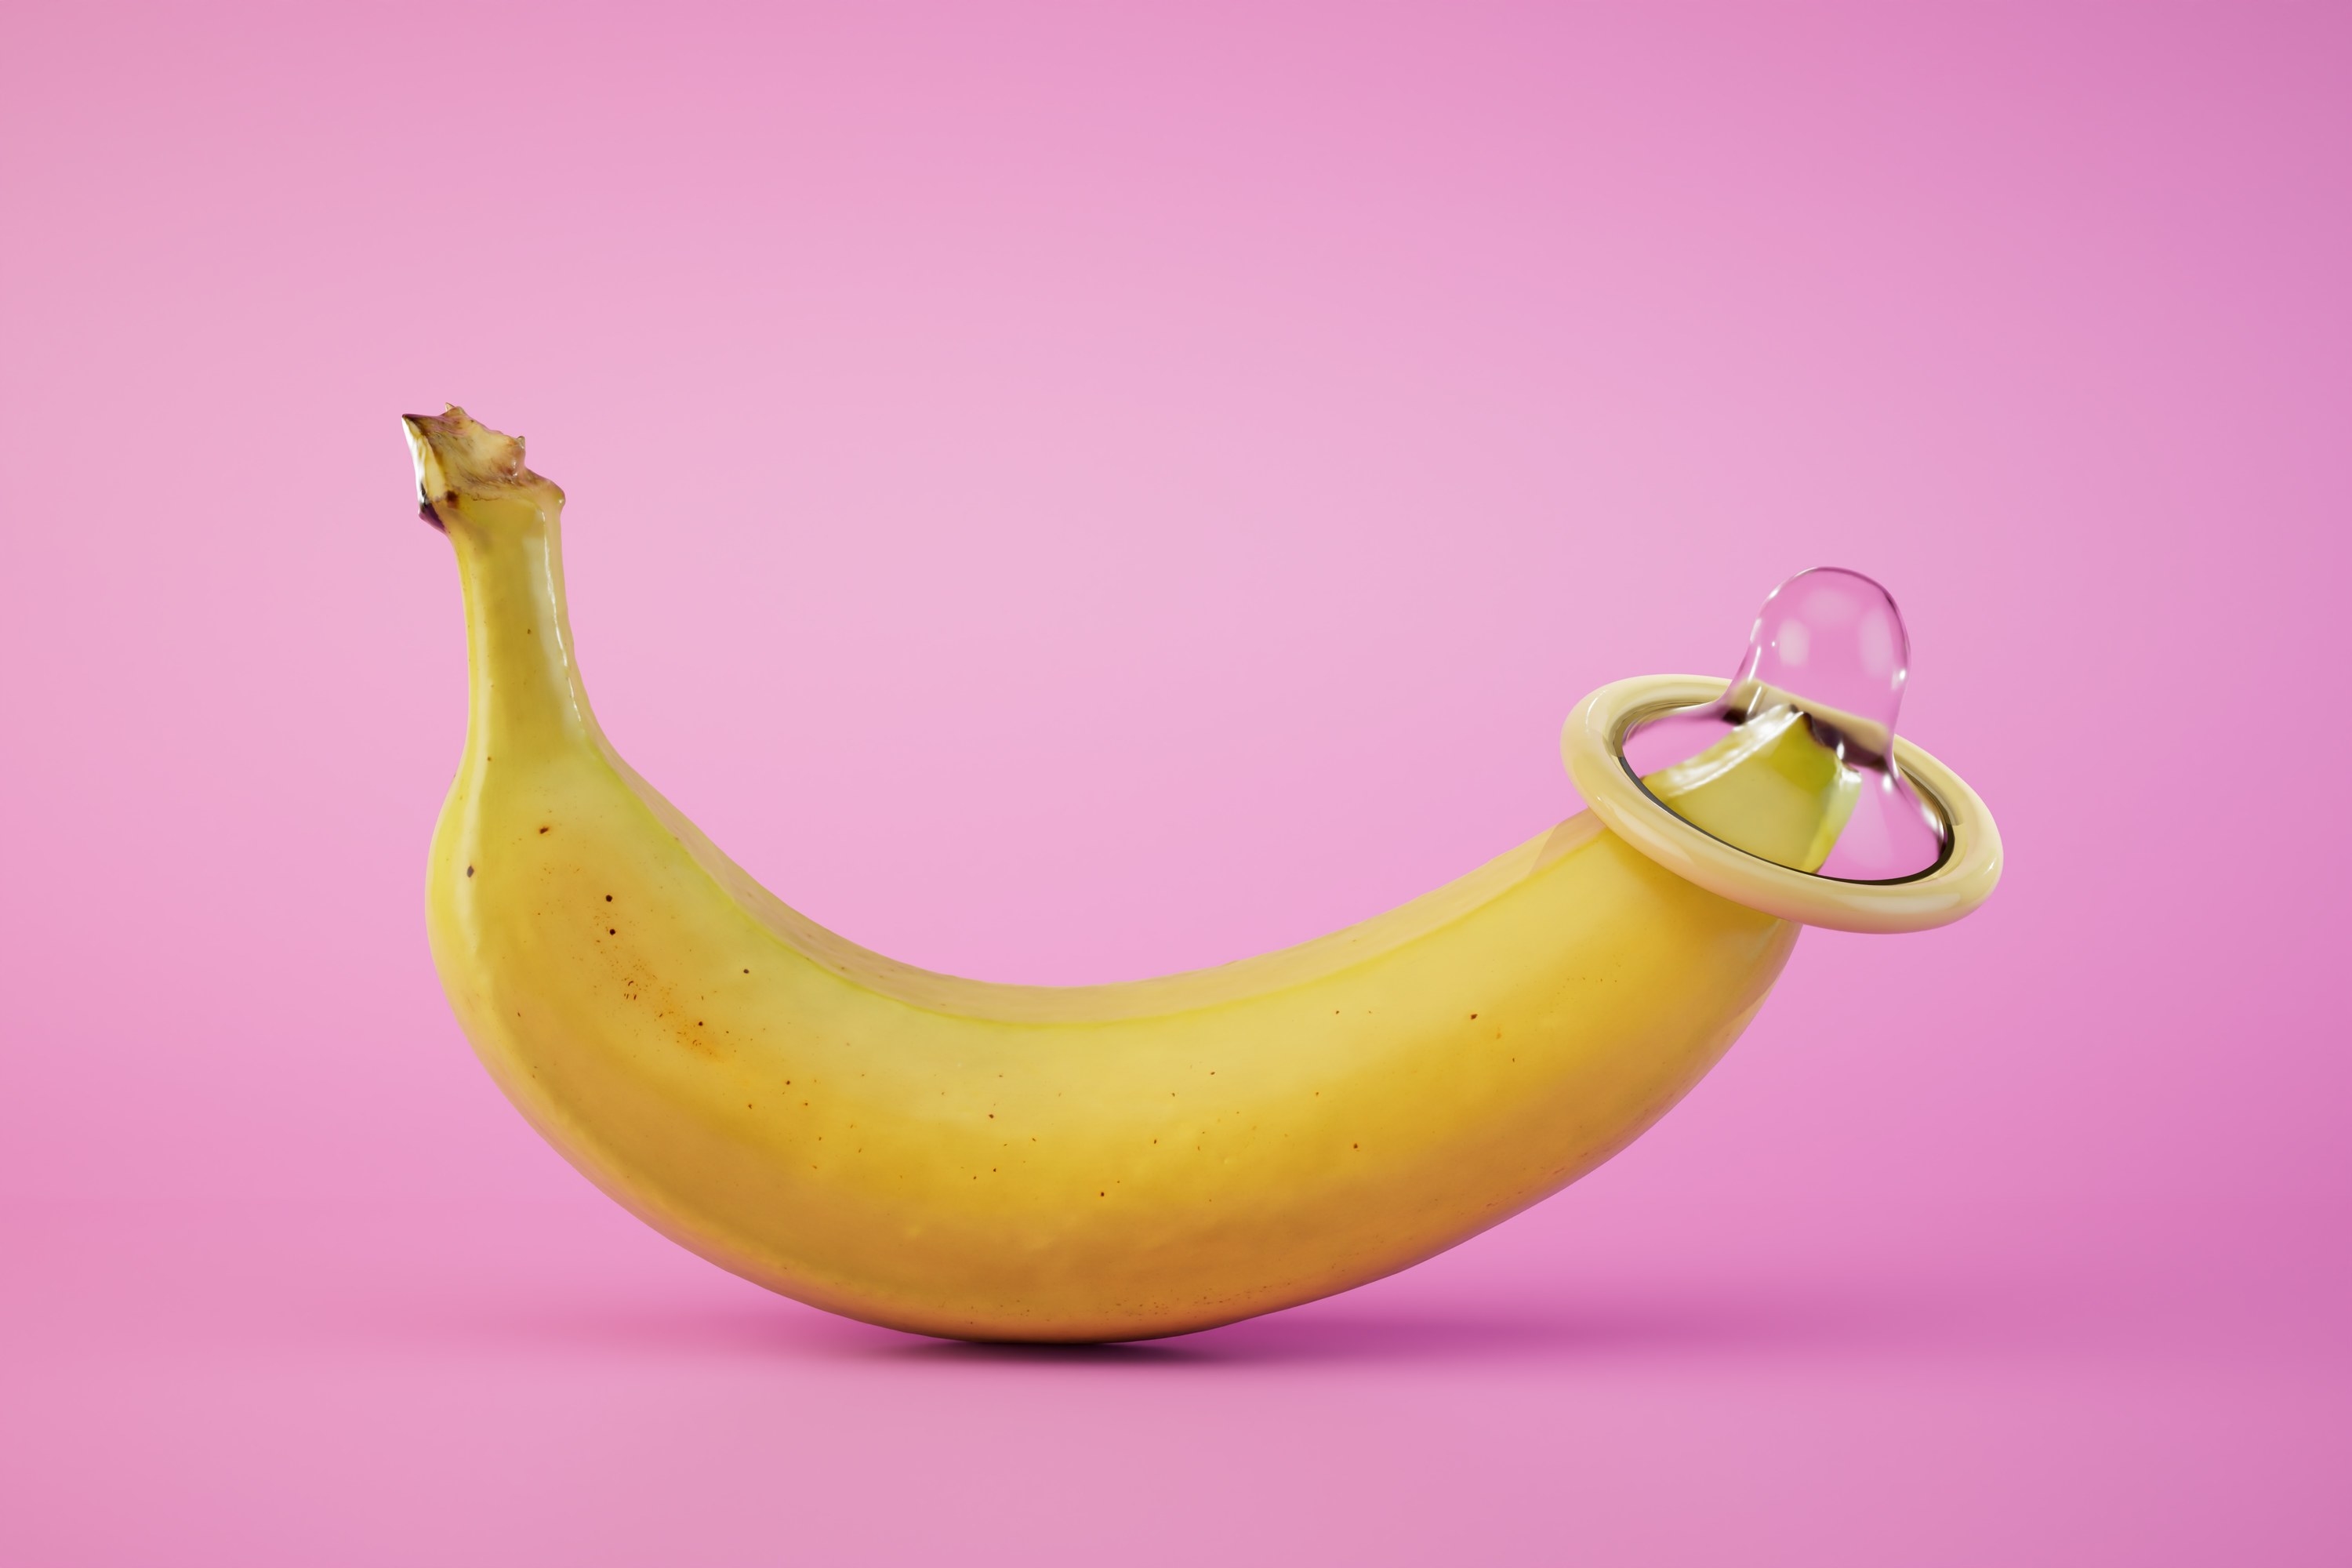 a condom worn on the tip of a banana in front of a pink pastel background